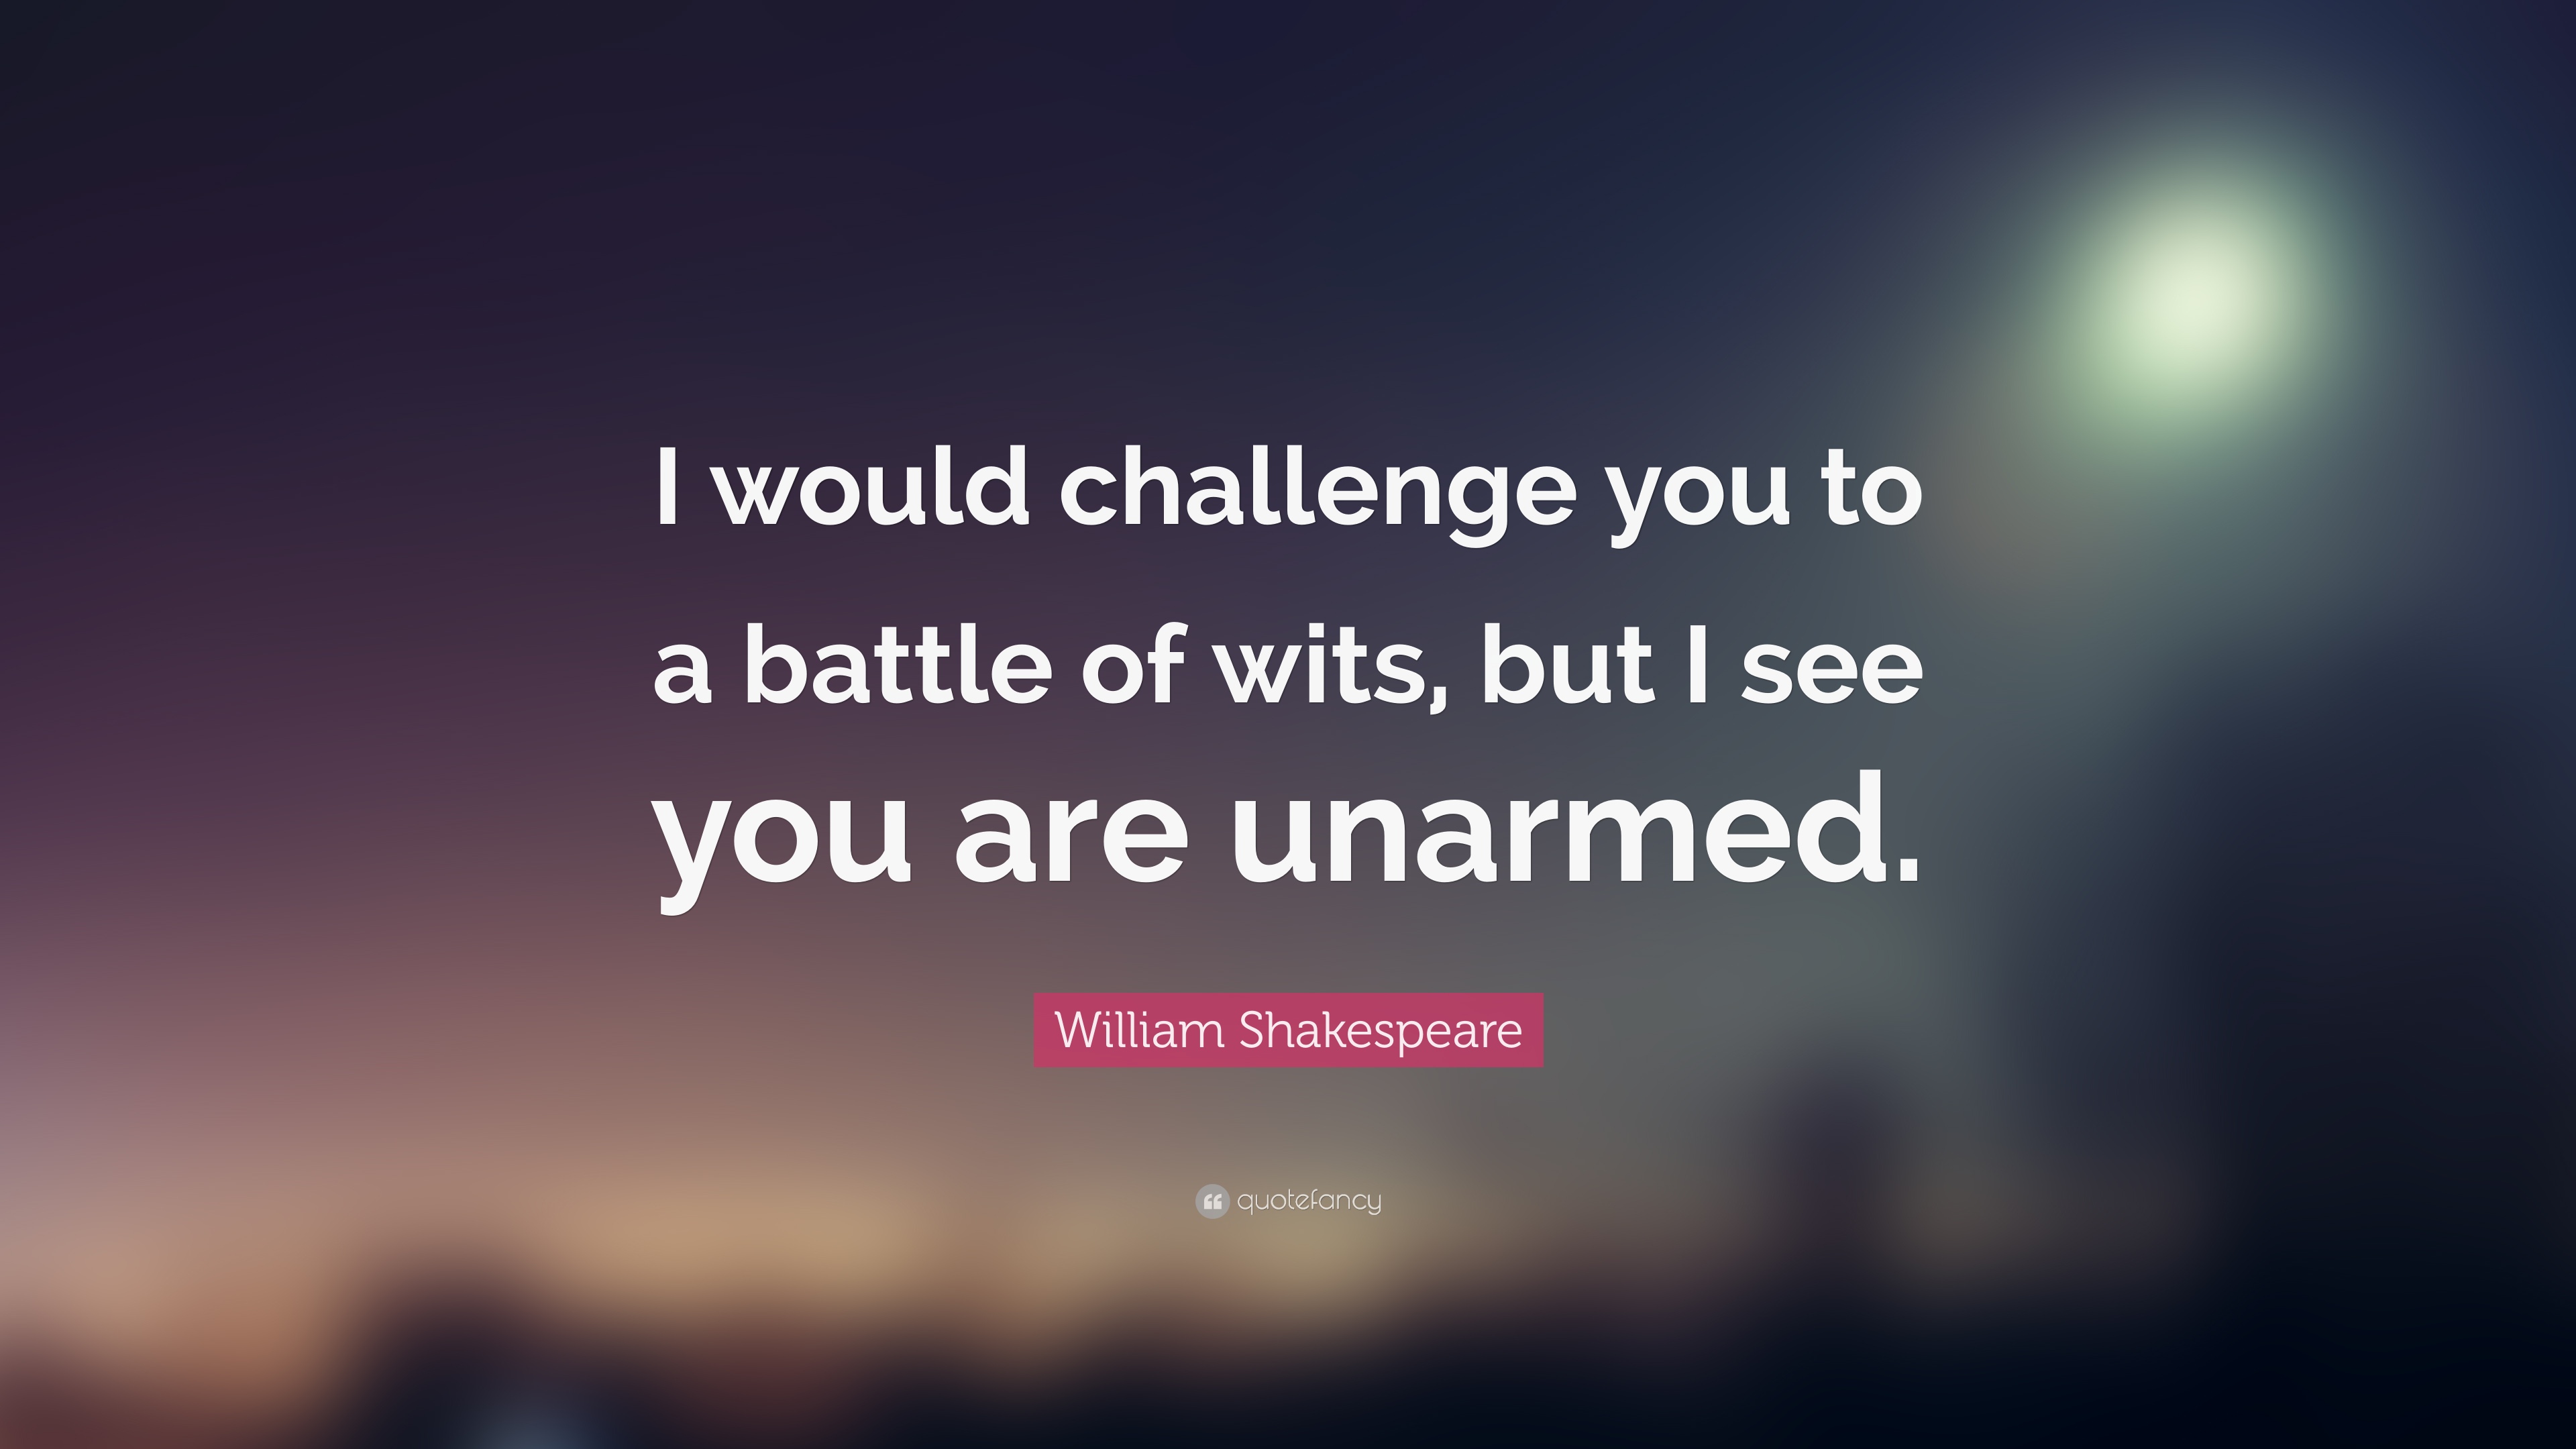 26188-William-Shakespeare-Quote-I-would-challenge-you-to-a-battle-of.jpg